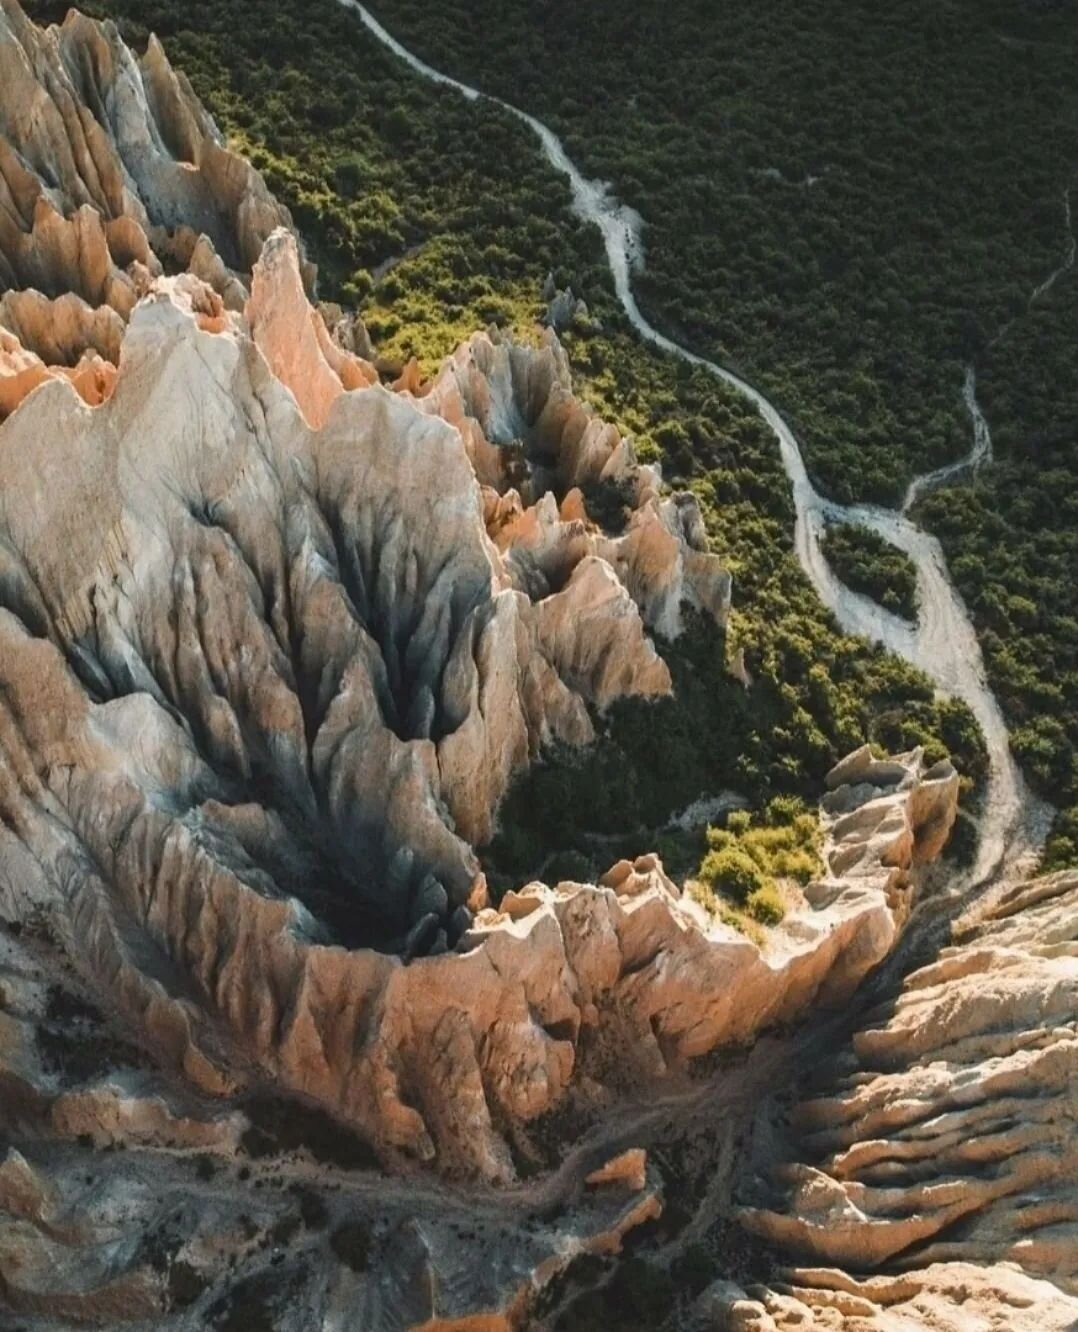 The Clay Cliffs are a stark sight - tall pinnacles separated by narrow ravines.

These otherworldly formations in New Zealand are made up of layers of gravel and silt, originally formed by the flow from ancient glaciers over a million years ago.

#Ex